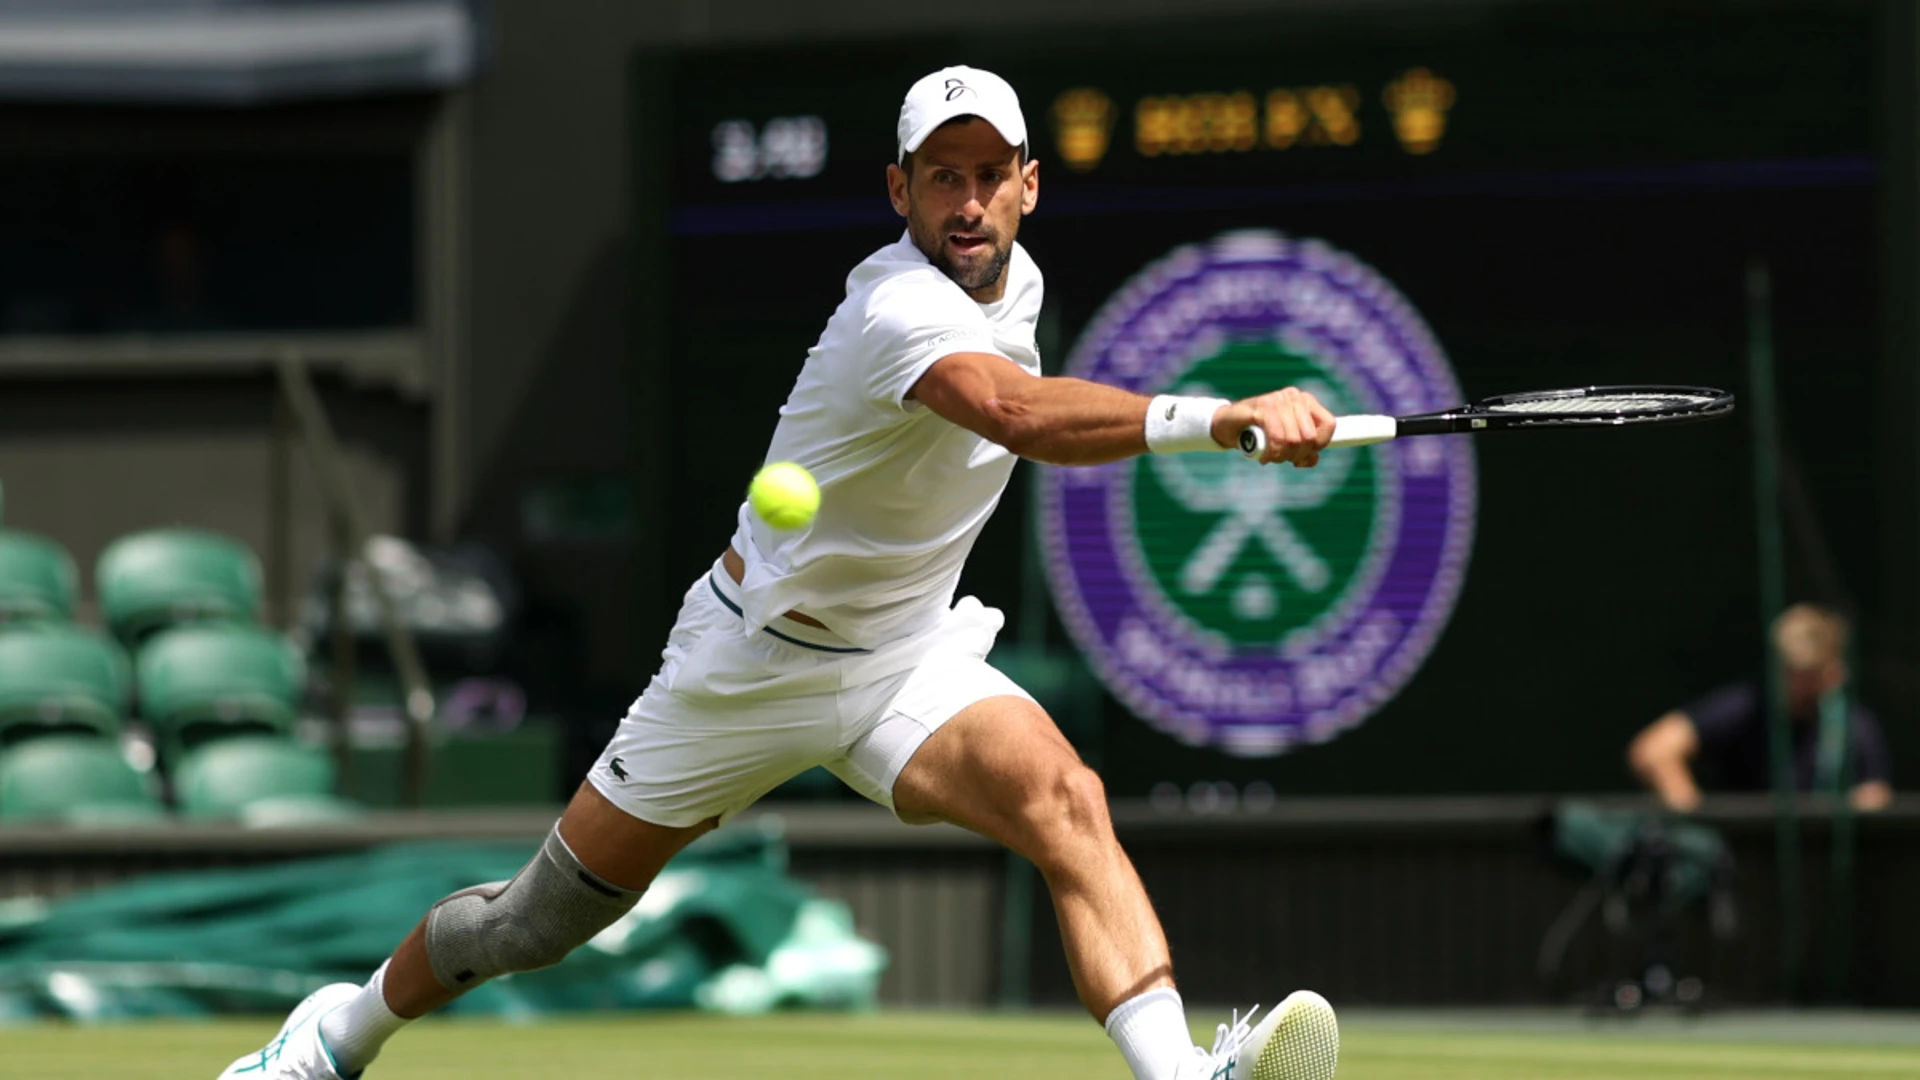 Djokovic 'pain free' ahead of Wimbledon after Medvedev exhibition win